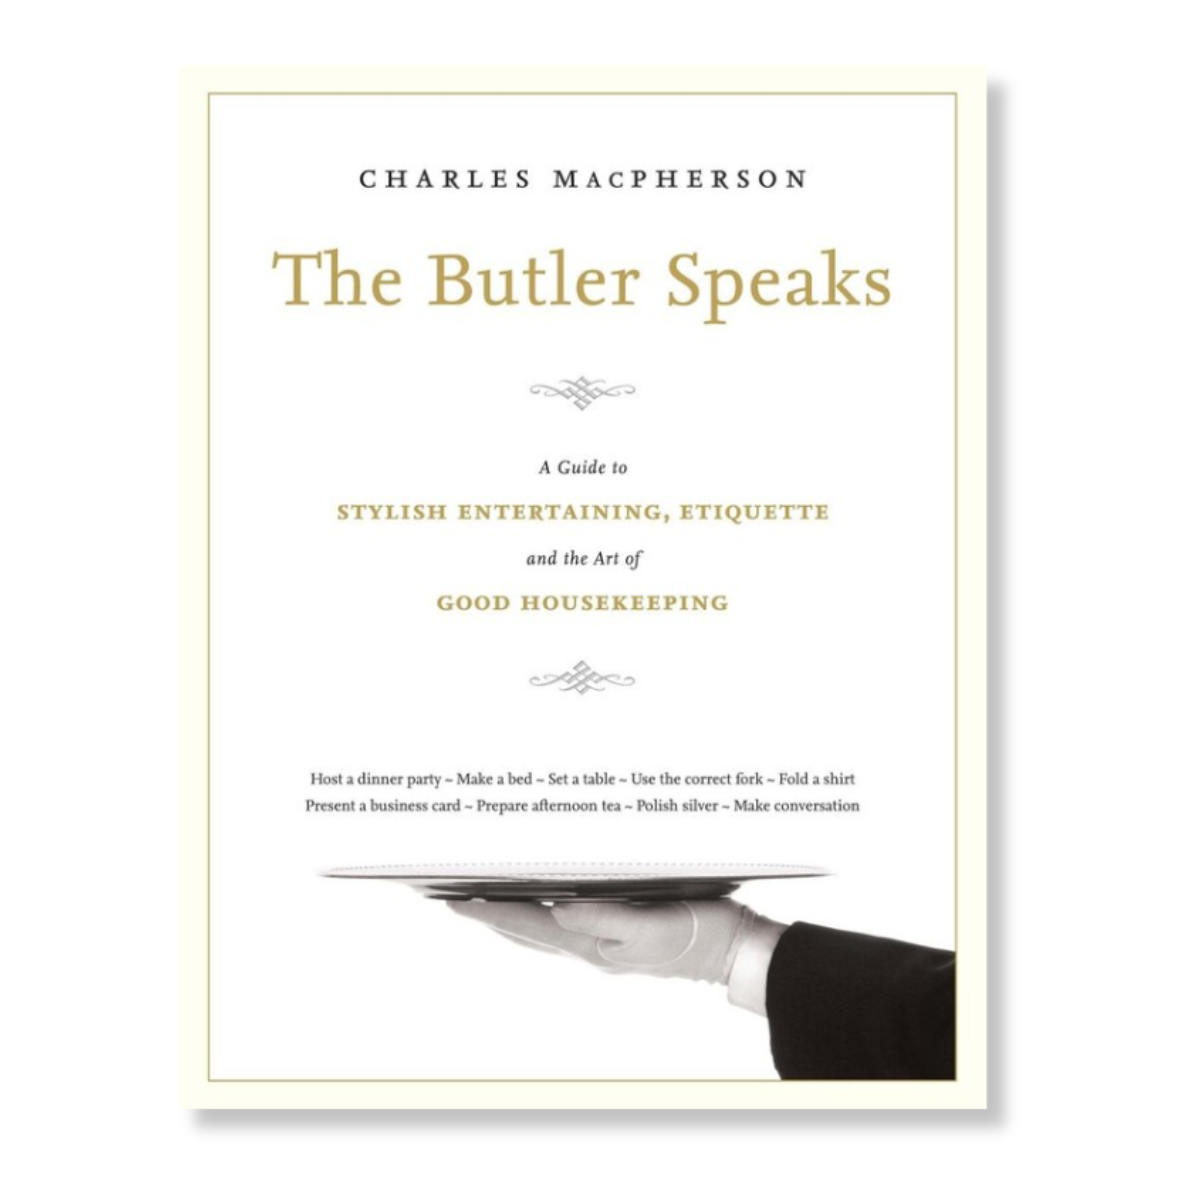 The Butler Speaks, a Return to Proper Etiquette, Stylish Entertaining, and the Art of Good Housekeeping